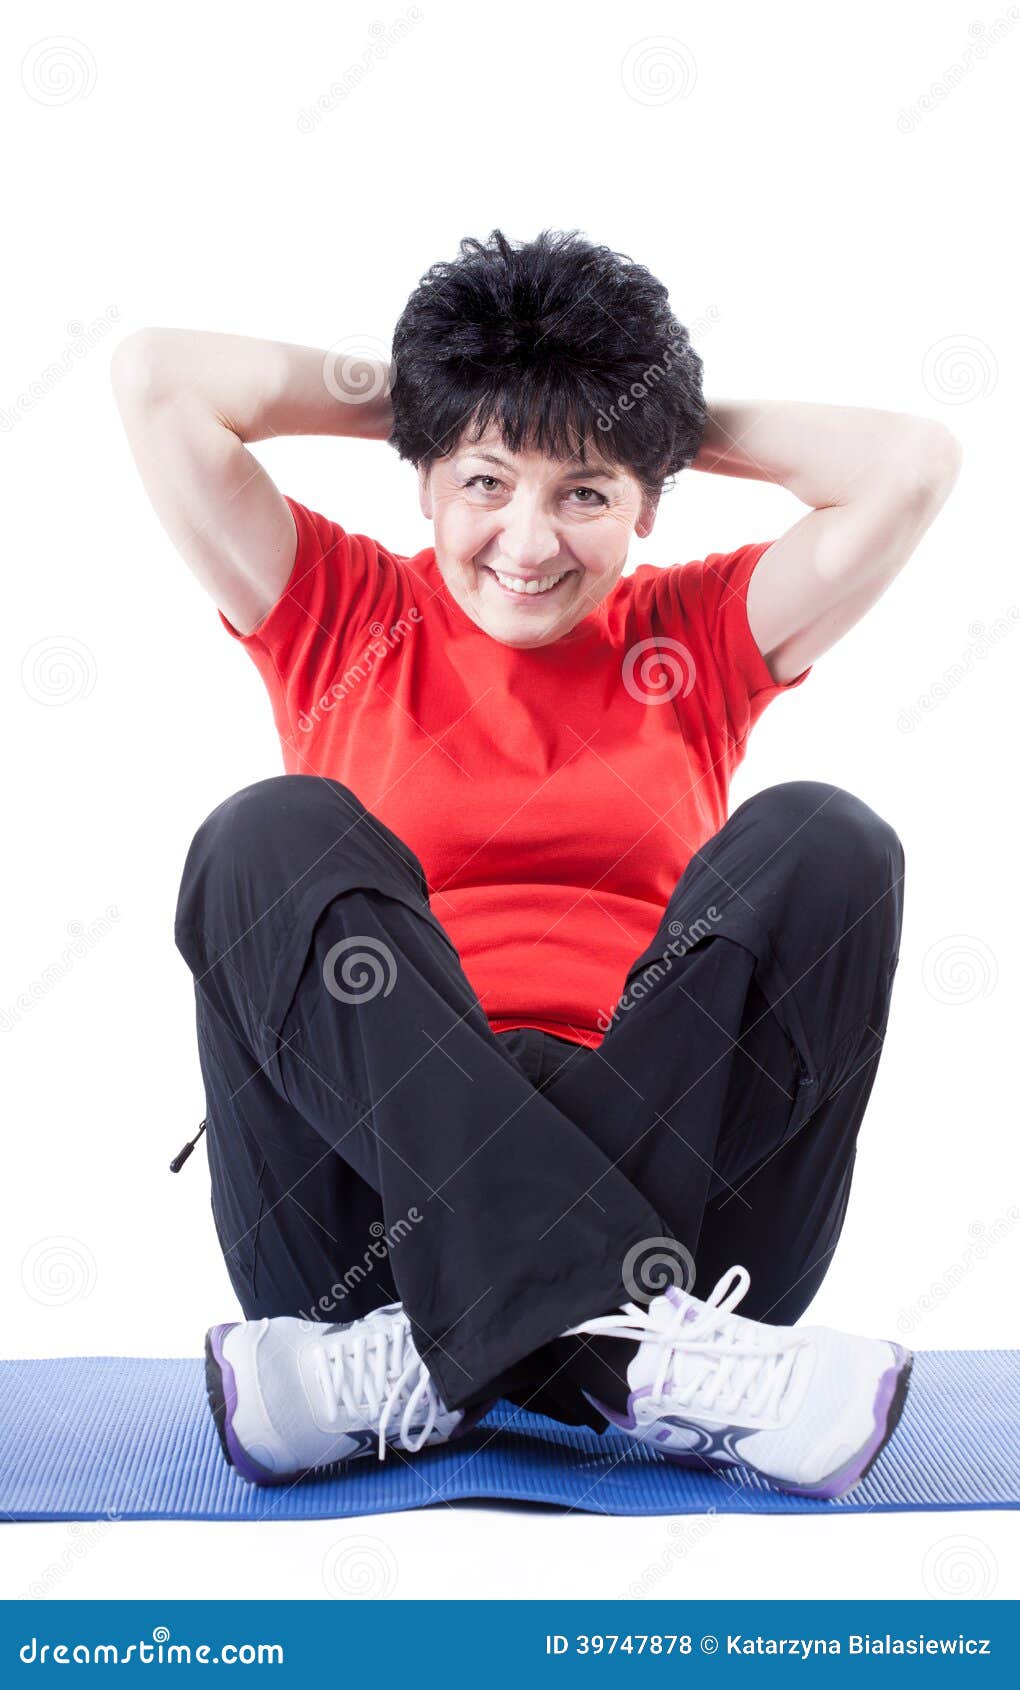 middle-aged woman doing sit-ups